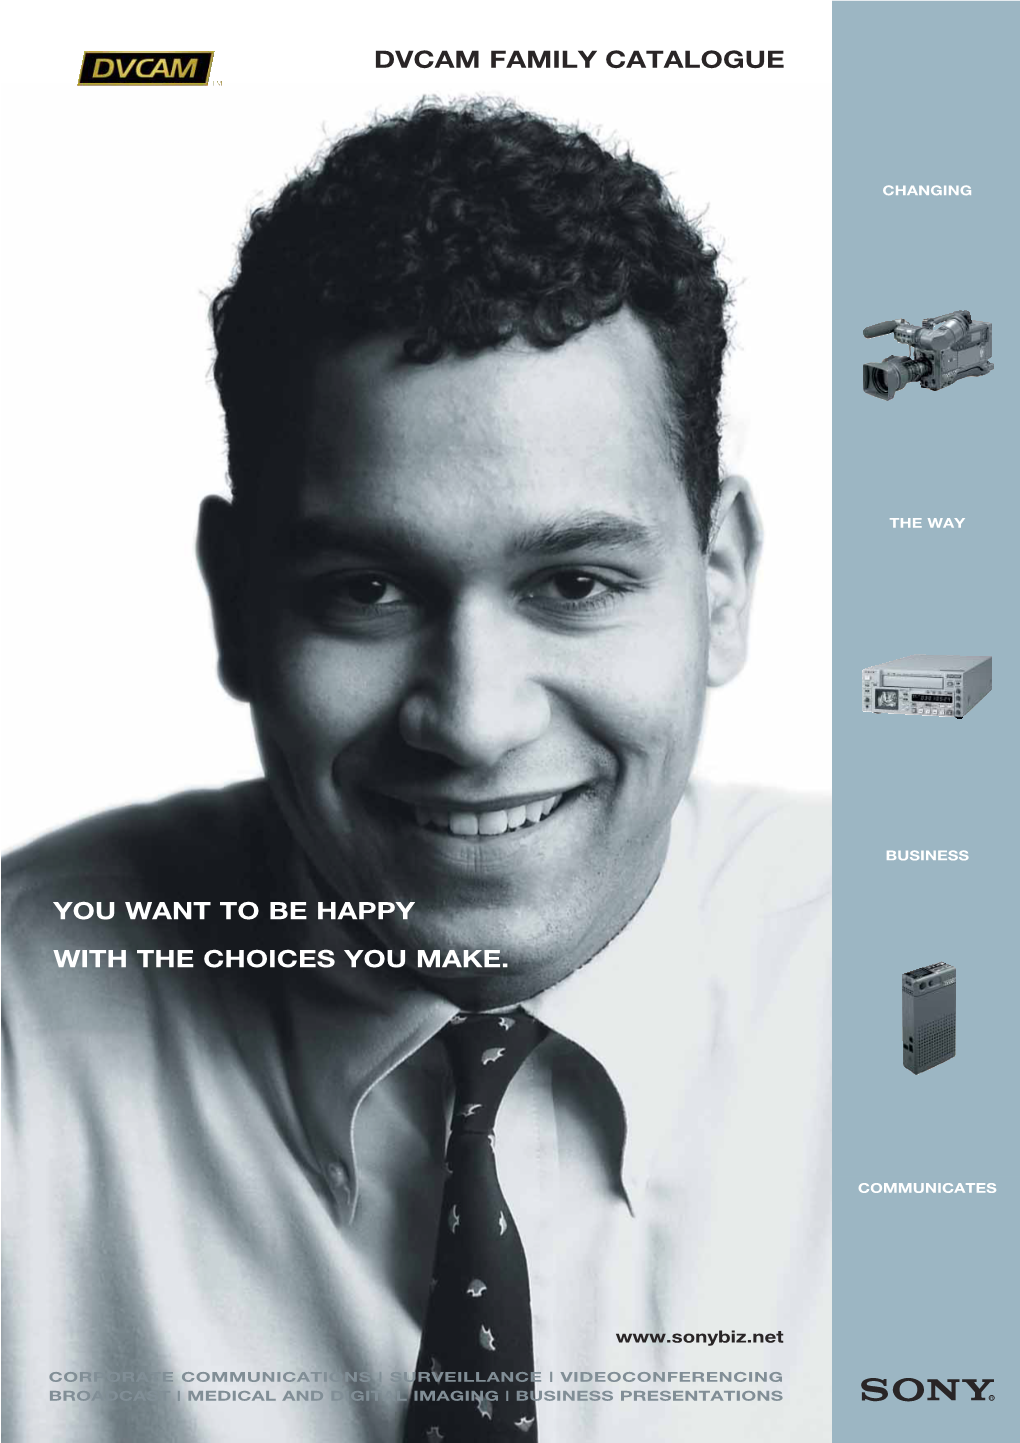 Dvcam Family Catalogue You Want to Be Happy with the Choices You Make